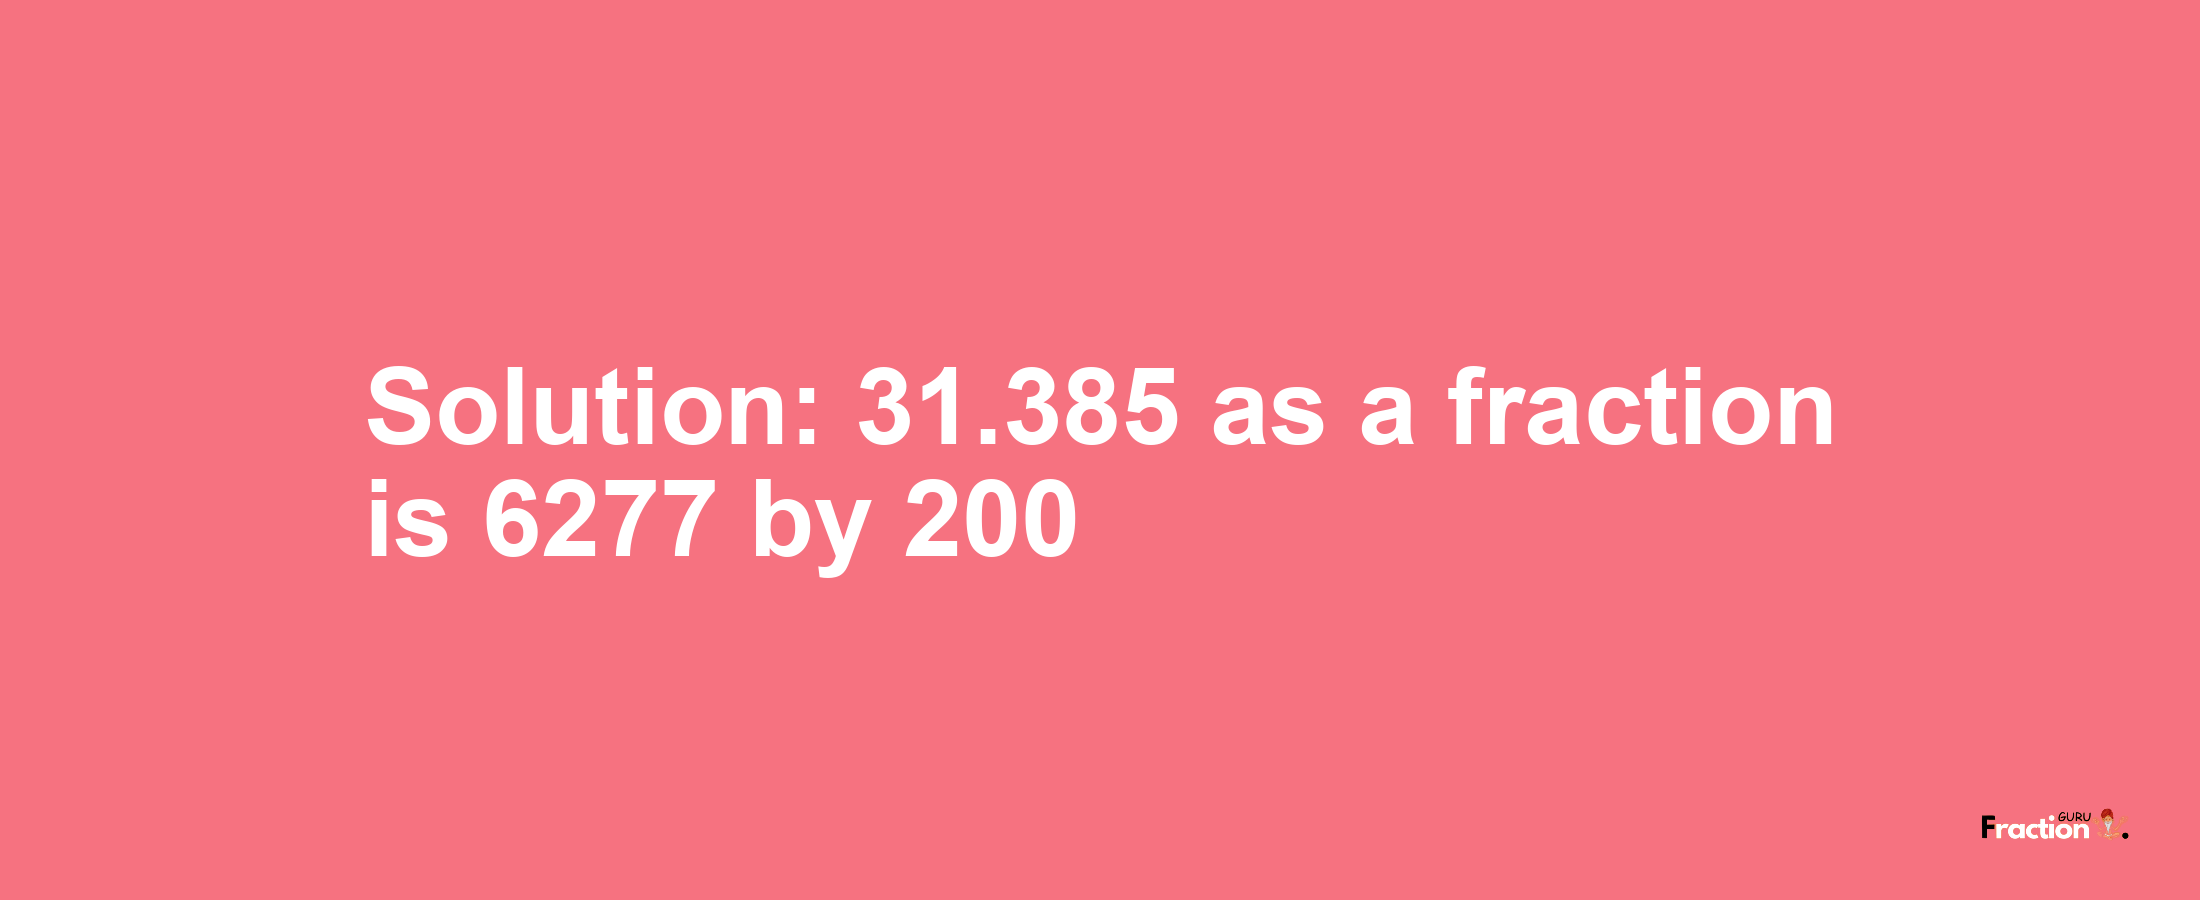 Solution:31.385 as a fraction is 6277/200